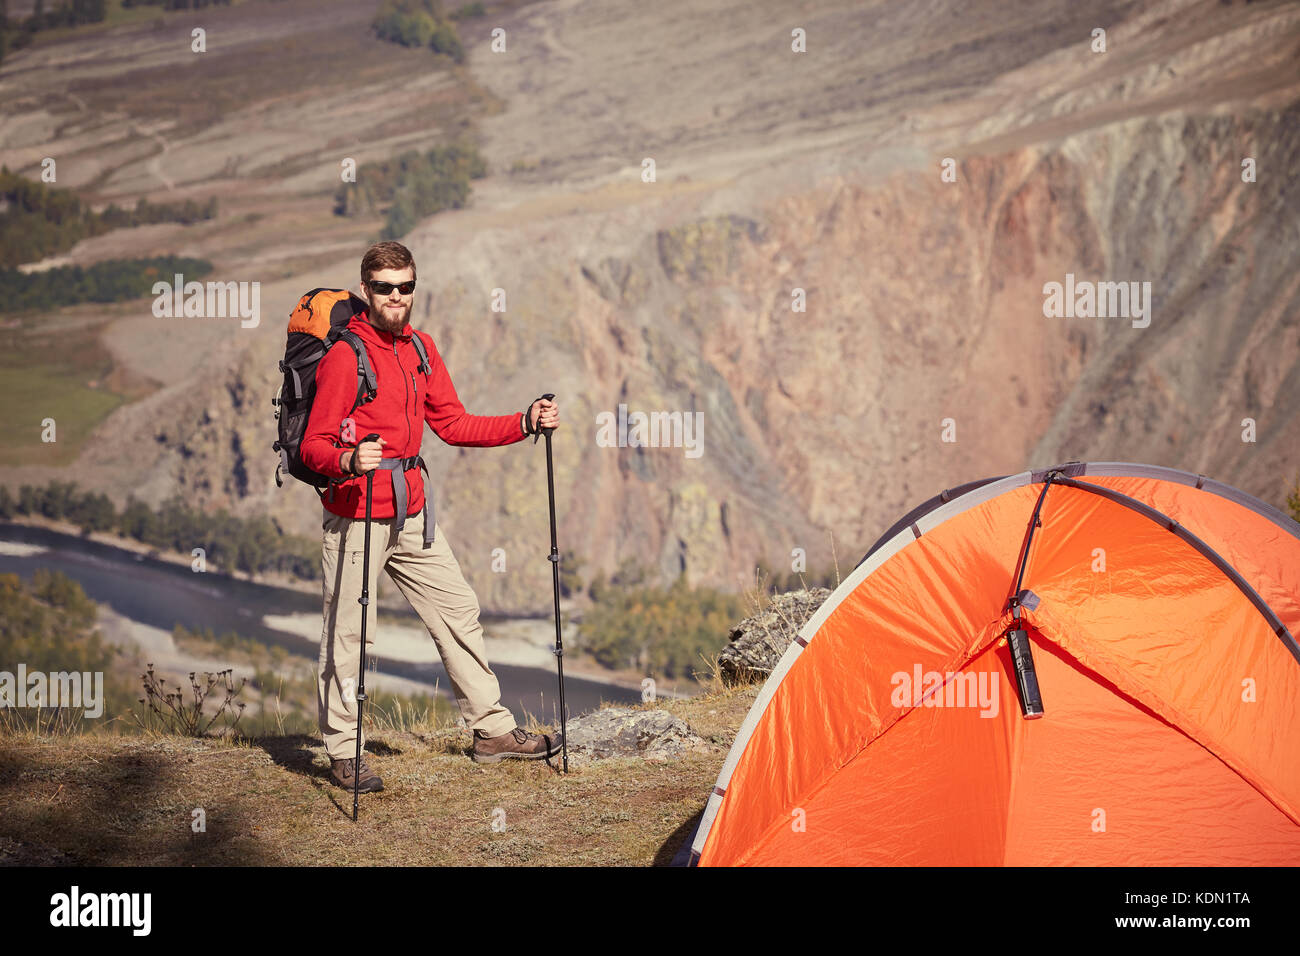 Backpacker with poles in hand. Stock Photo